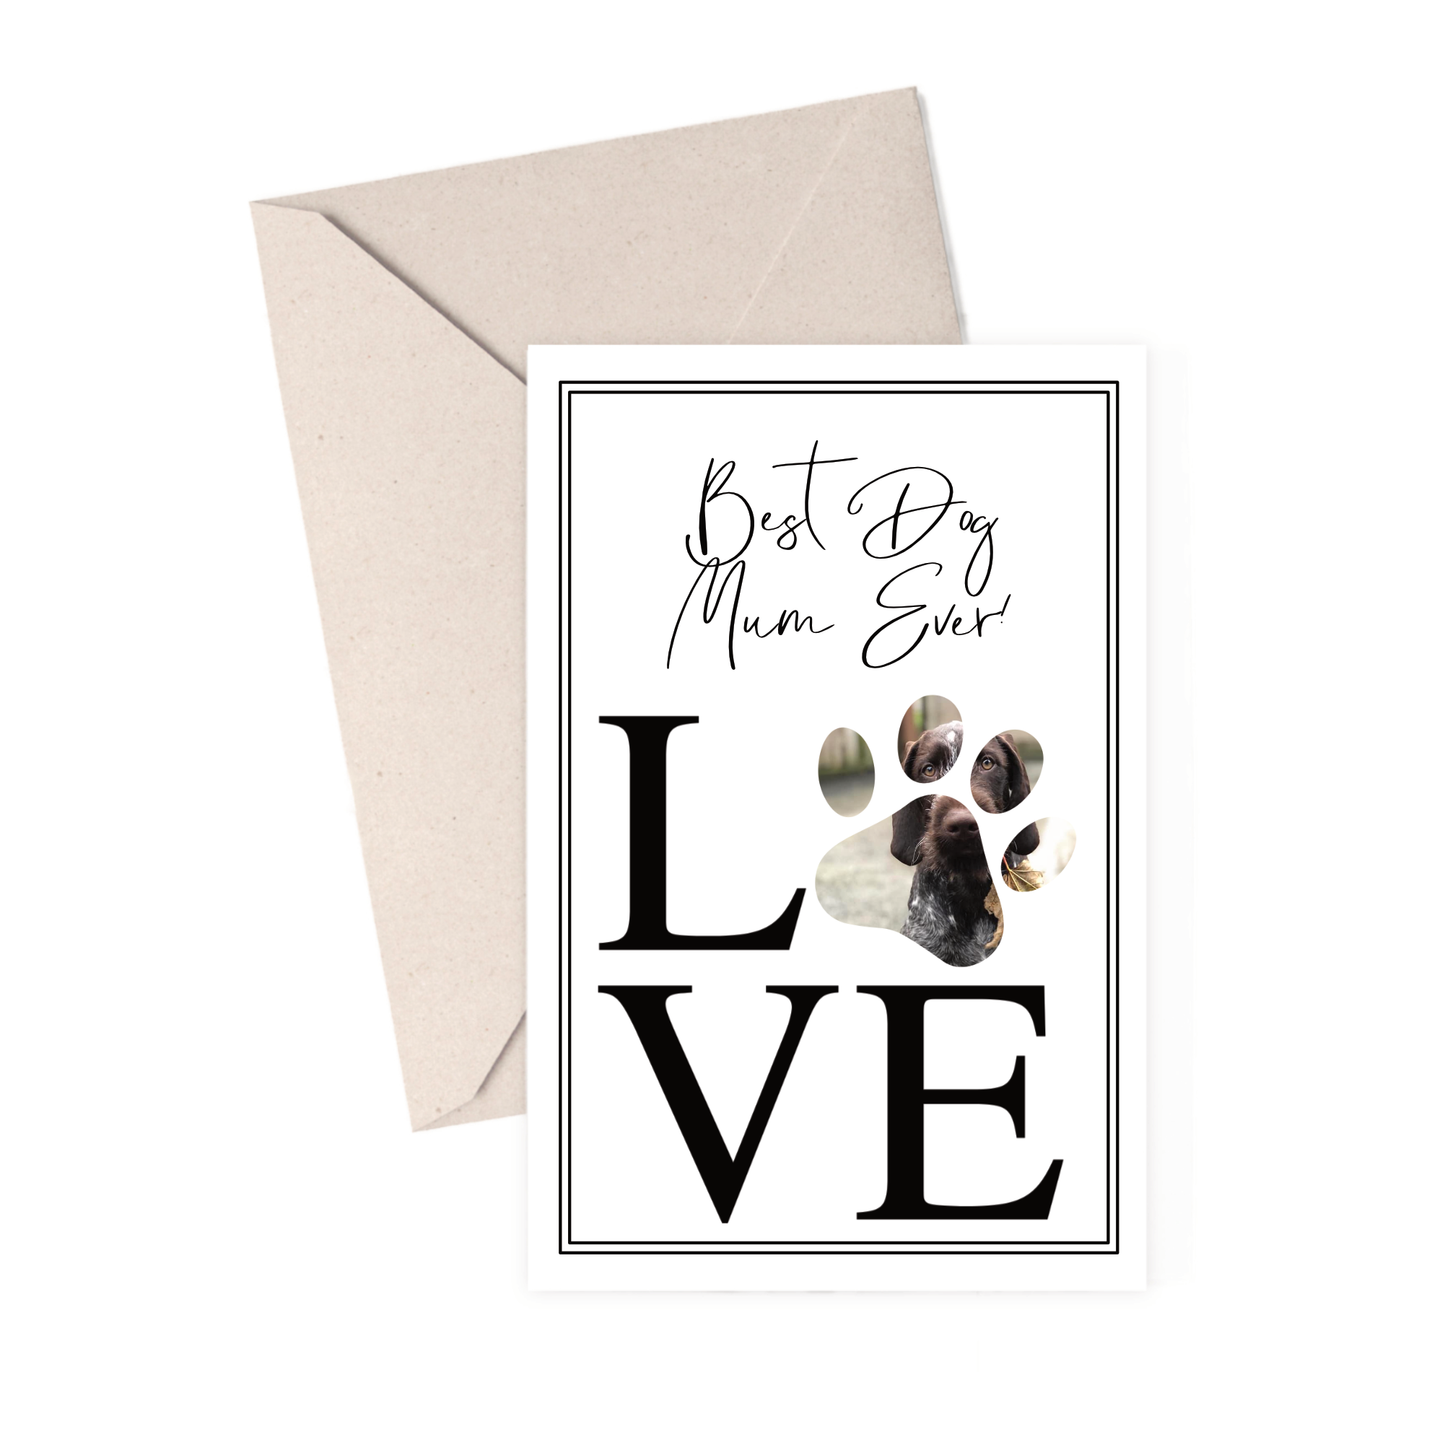 White greetings card personalised with a photo situated inside a paw print design. The wording reads 'best dog mum ever..